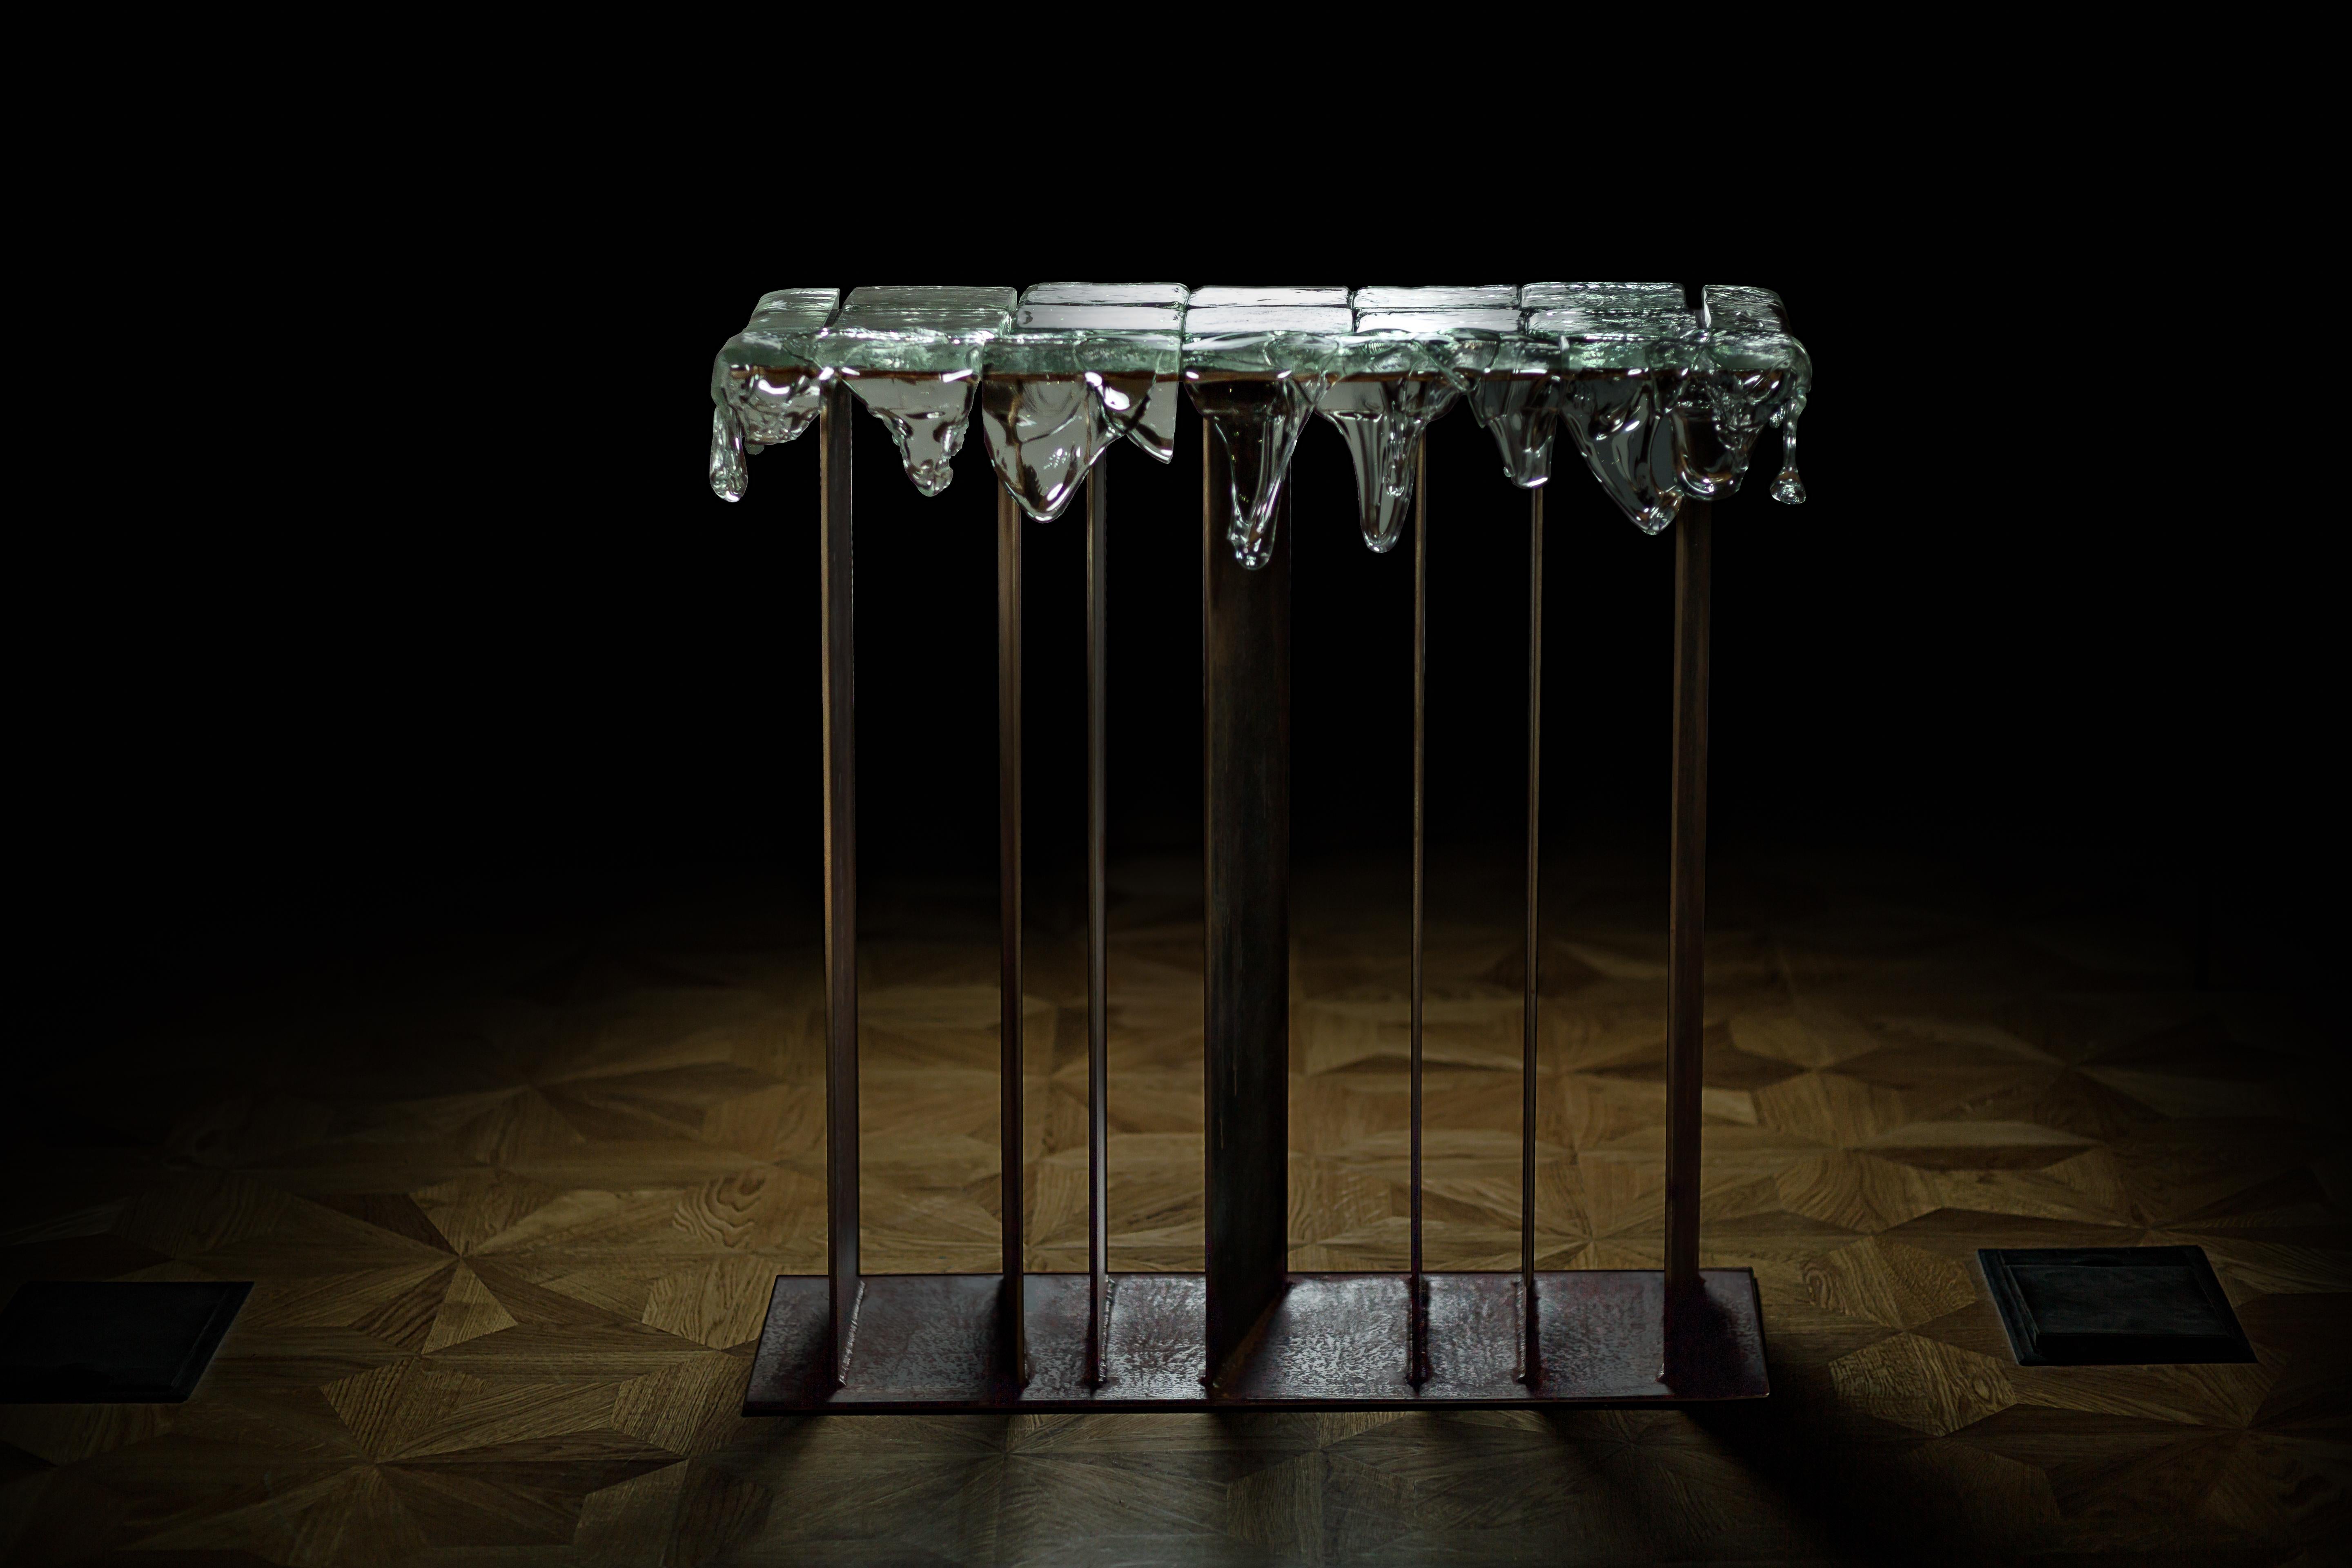 Time Console by Olexandr Pinchuk
Dimensions: D 32.5 x W 85 x H 82 cm.
Materials: Glass, iron.


Olexandr Pinchuk (Ukraine, 1986) Master of Laws, studied at the International Law Institute and Plekhanov Russian University of Economics. Since 2013, he